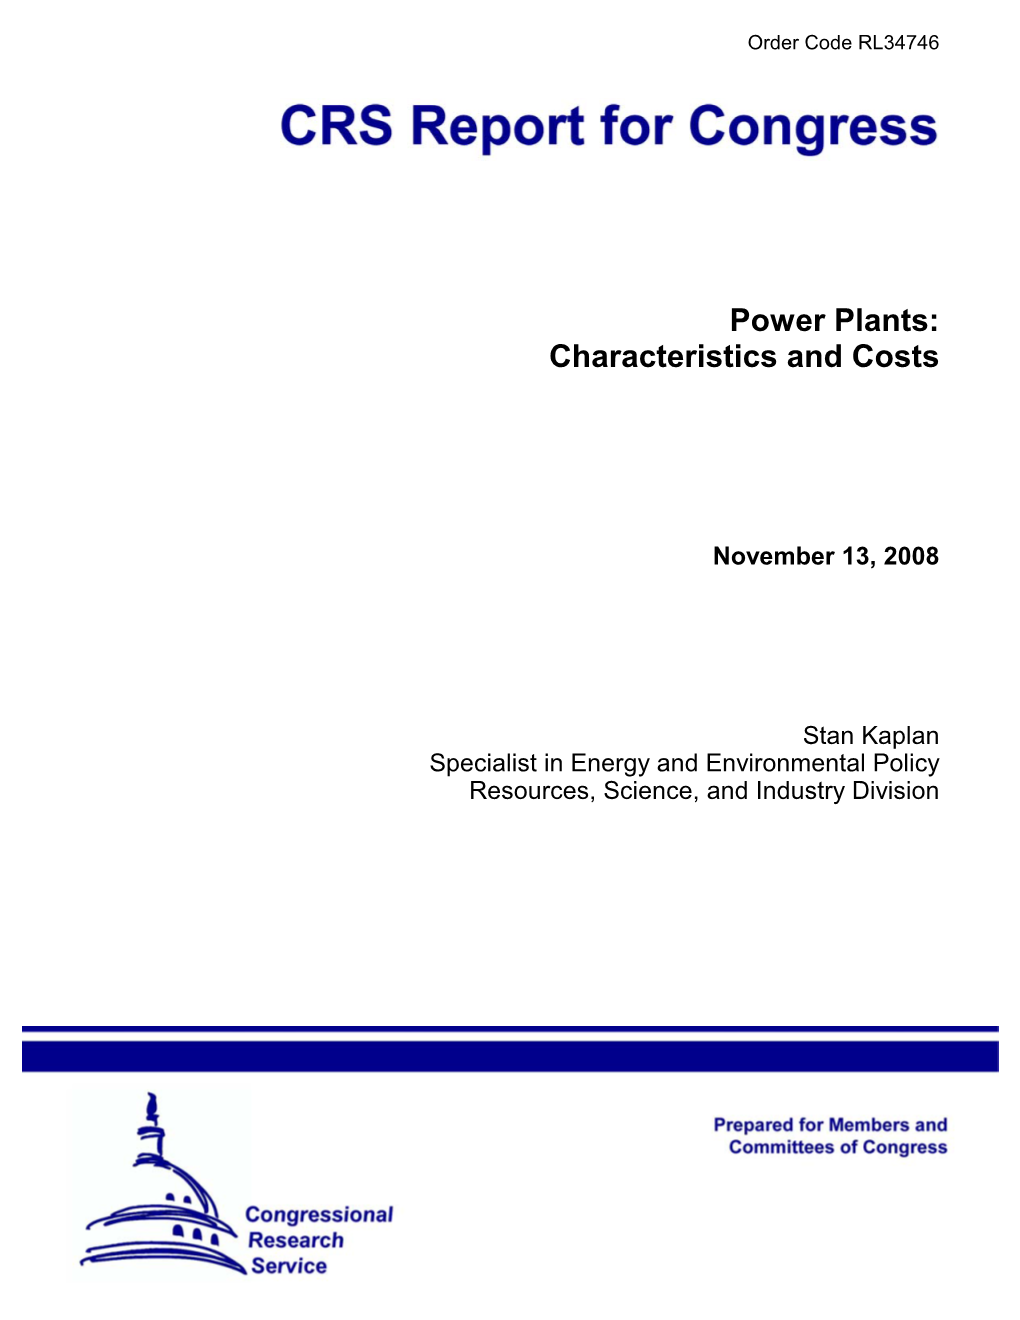 Power Plants: Characteristics and Costs